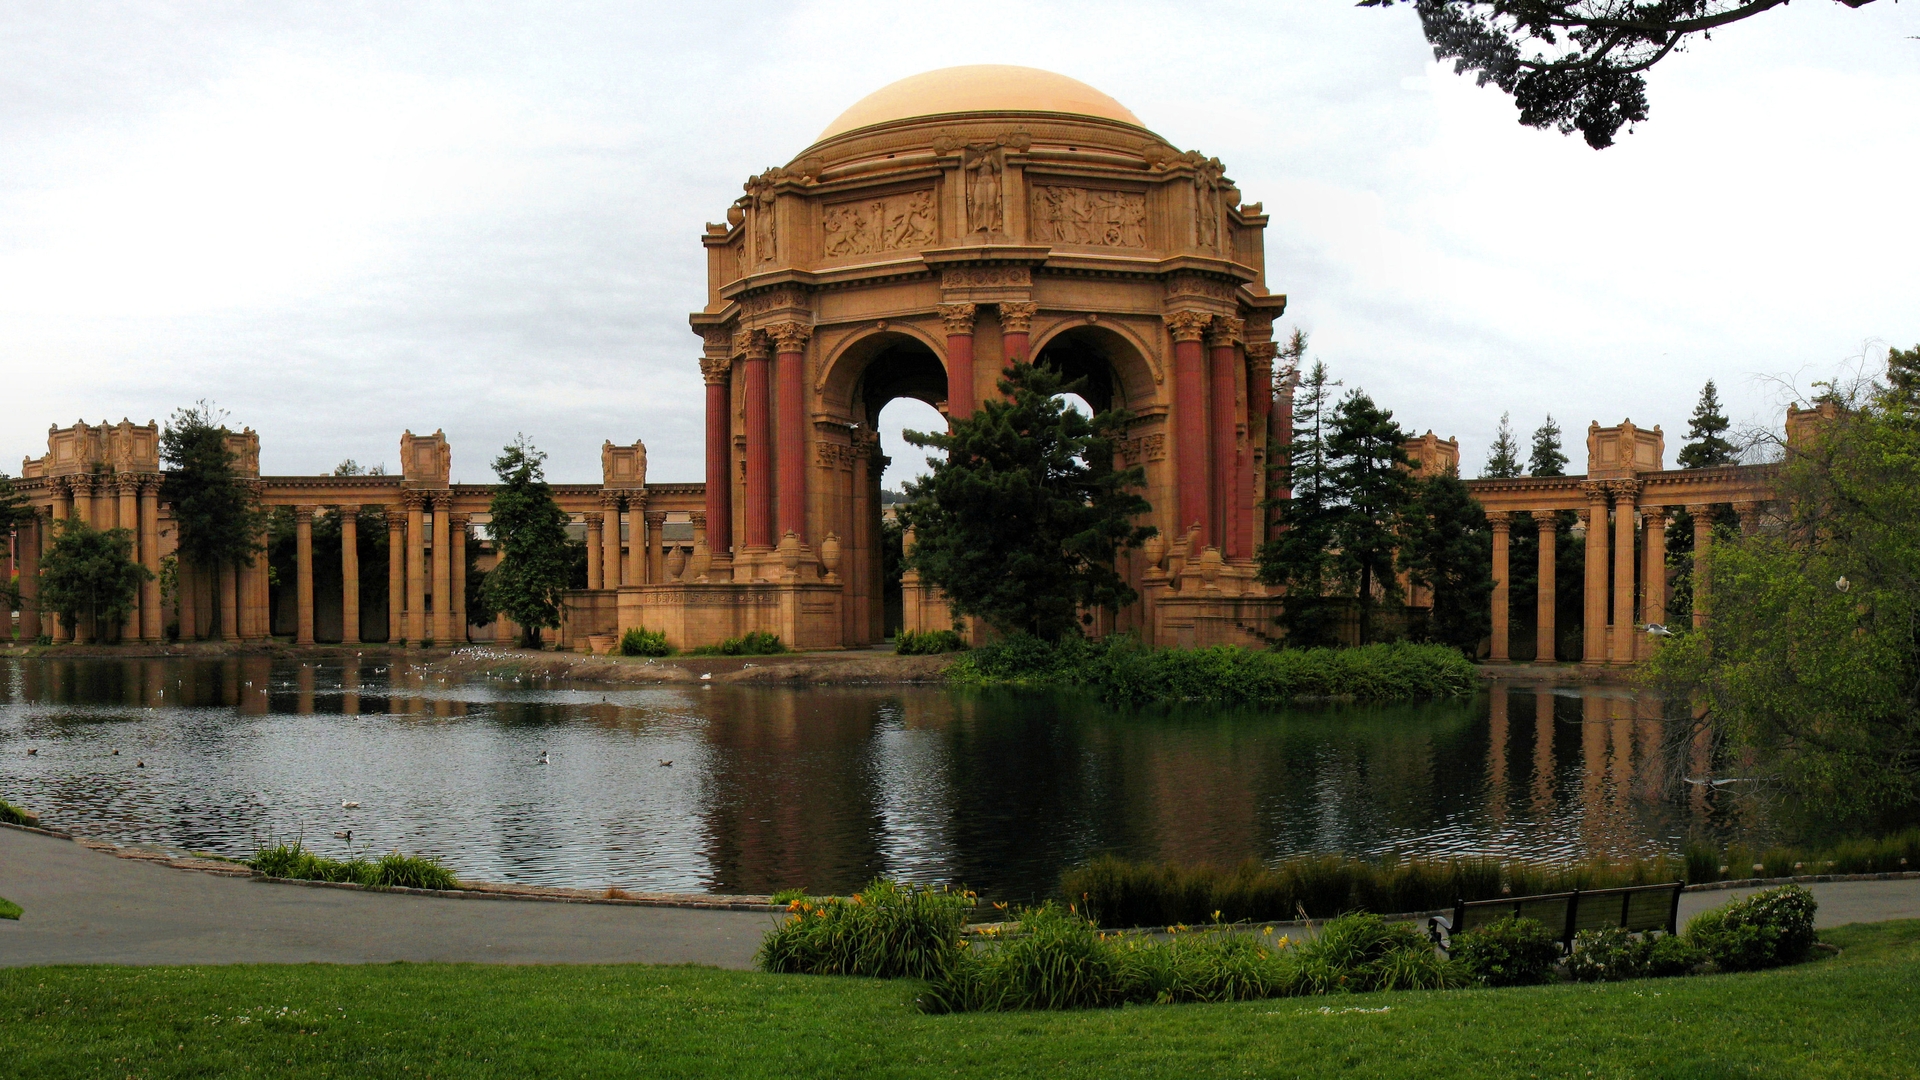 General 1920x1080 architecture San Francisco California USA Palace of Fine Arts water lake trees grass sky clouds building